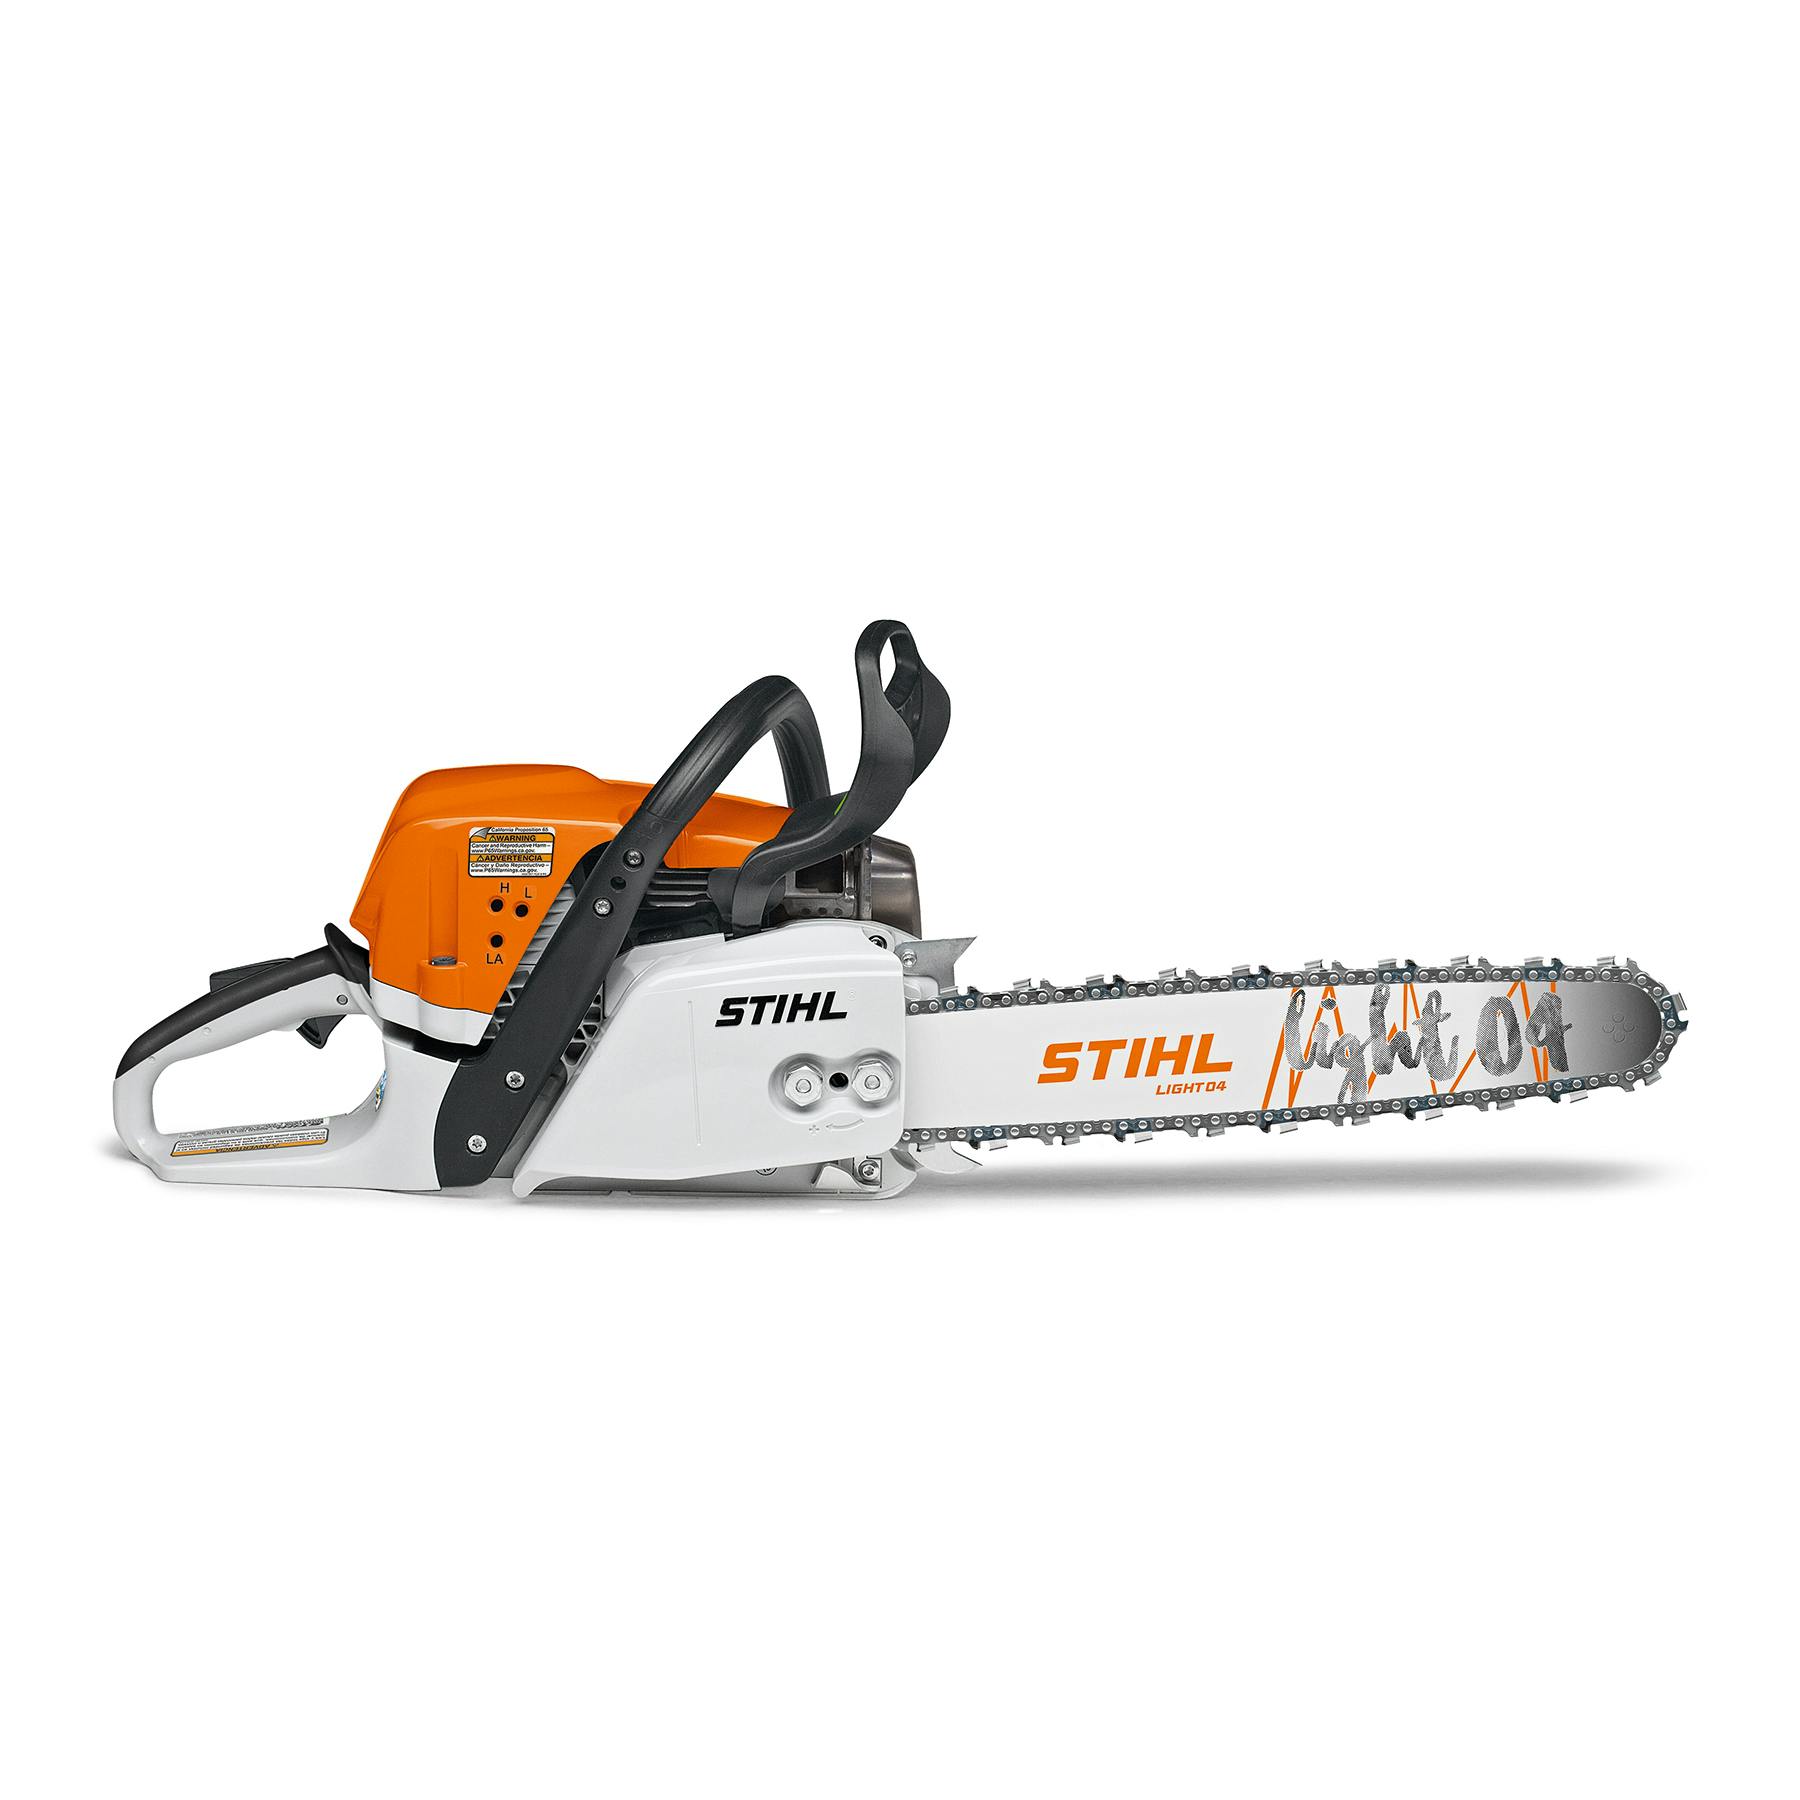 Is the Stihl Ms 311 a Pro Saw? Learn the Unbeatable Power and Performance!